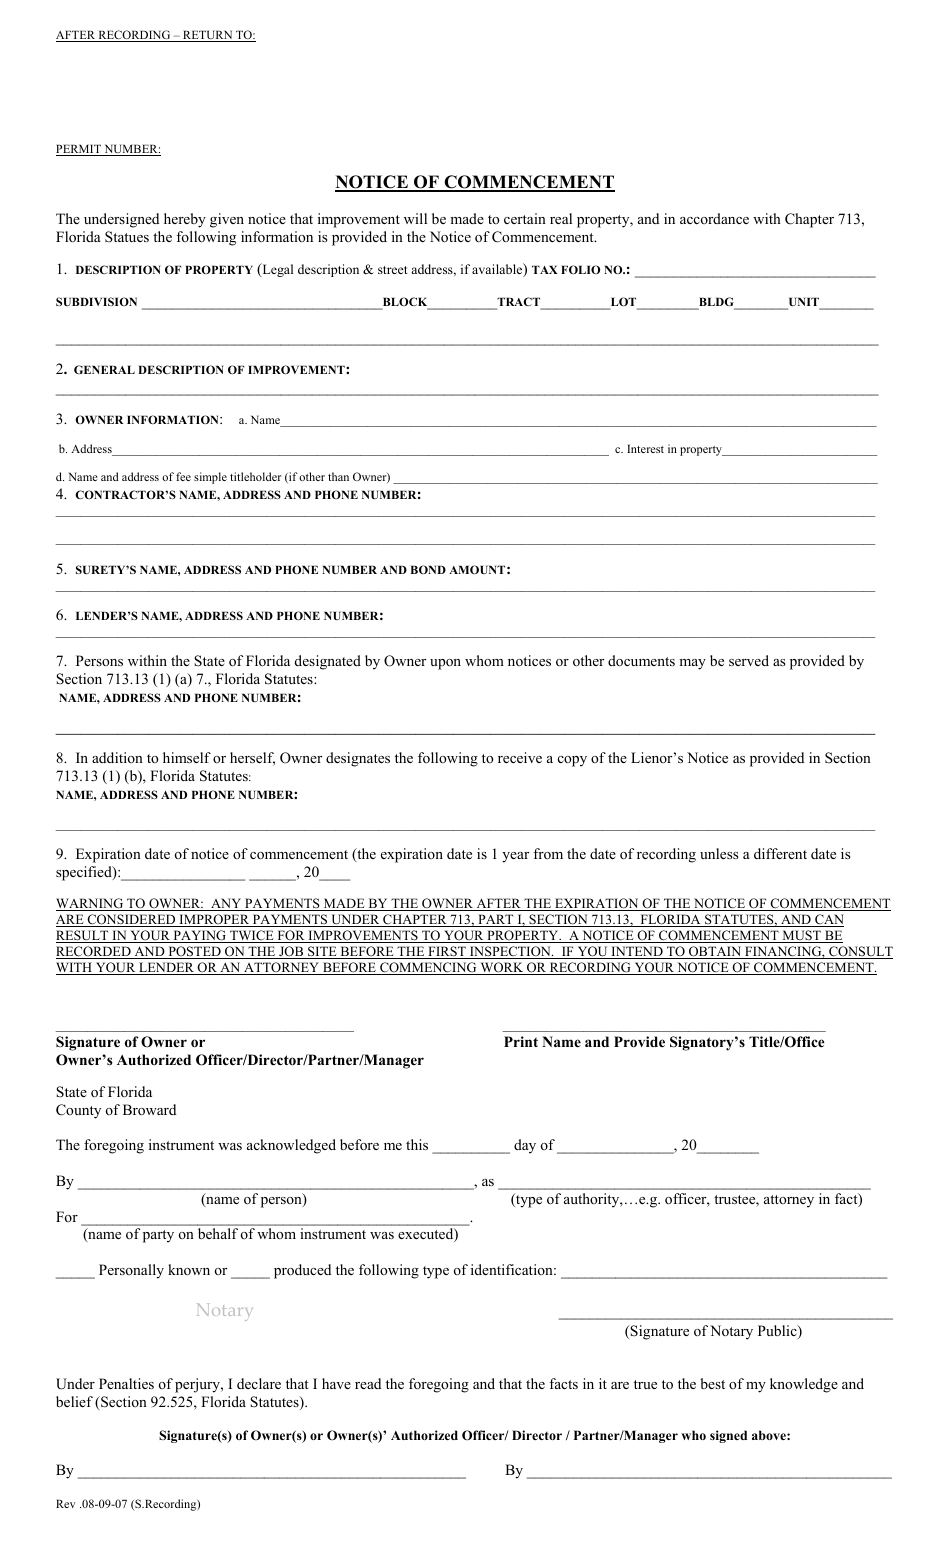 Notice of Commencement Form - Nine Points - Florida, Page 1